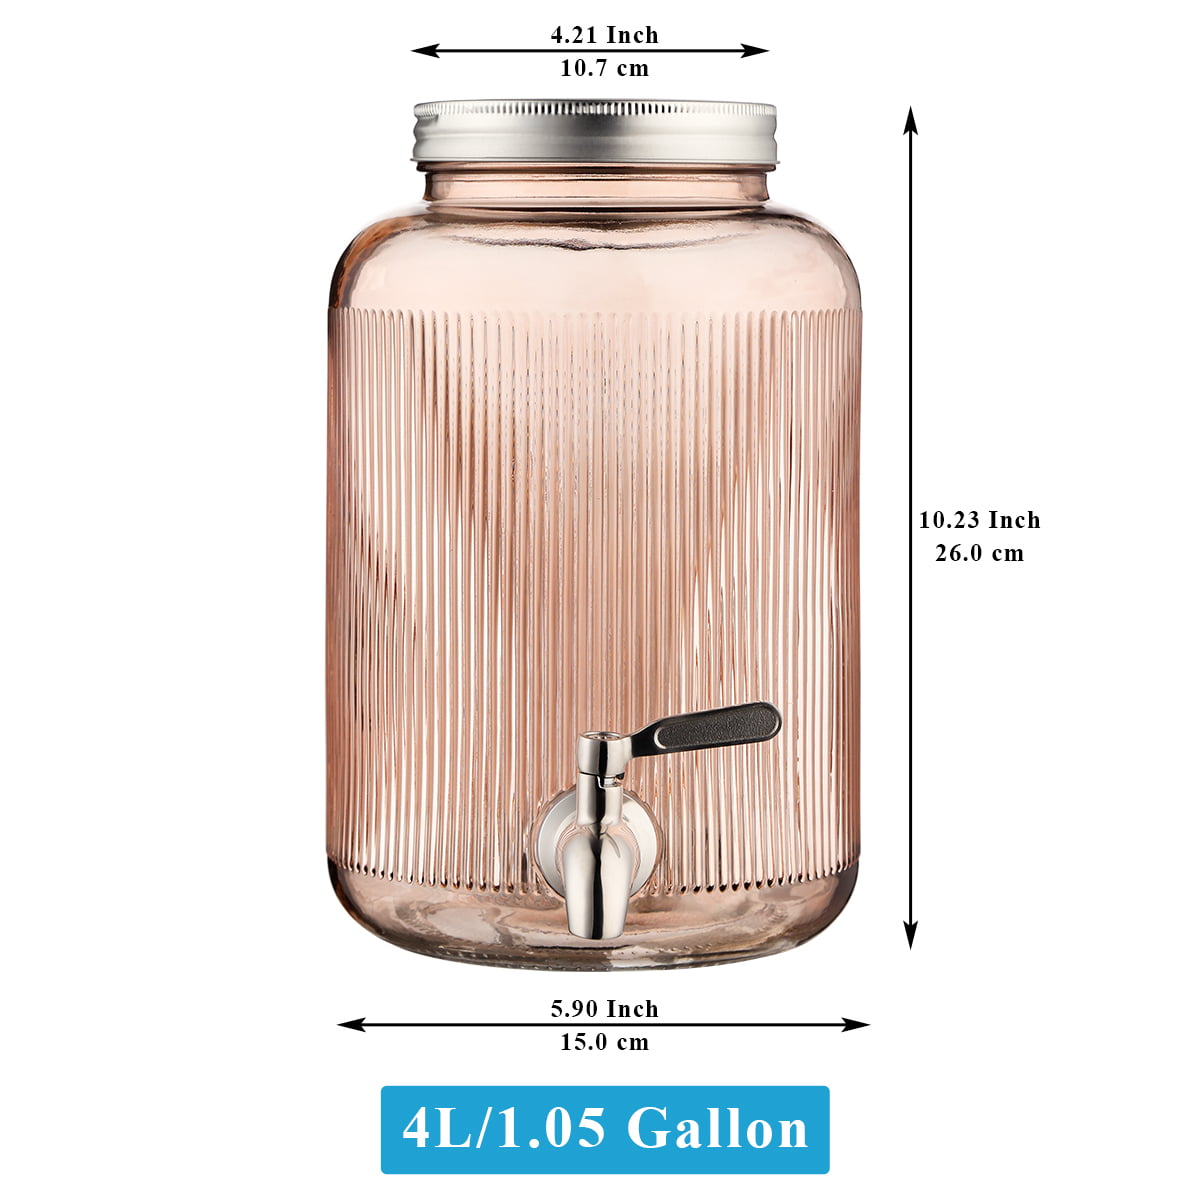 Reanea 1 Gallon Glass Beverage Dispenser with Ice Cylinder and Stainless Steel Lid and ABS Faucet, Size: 7.28 x 6.89 x 11.02, Blue